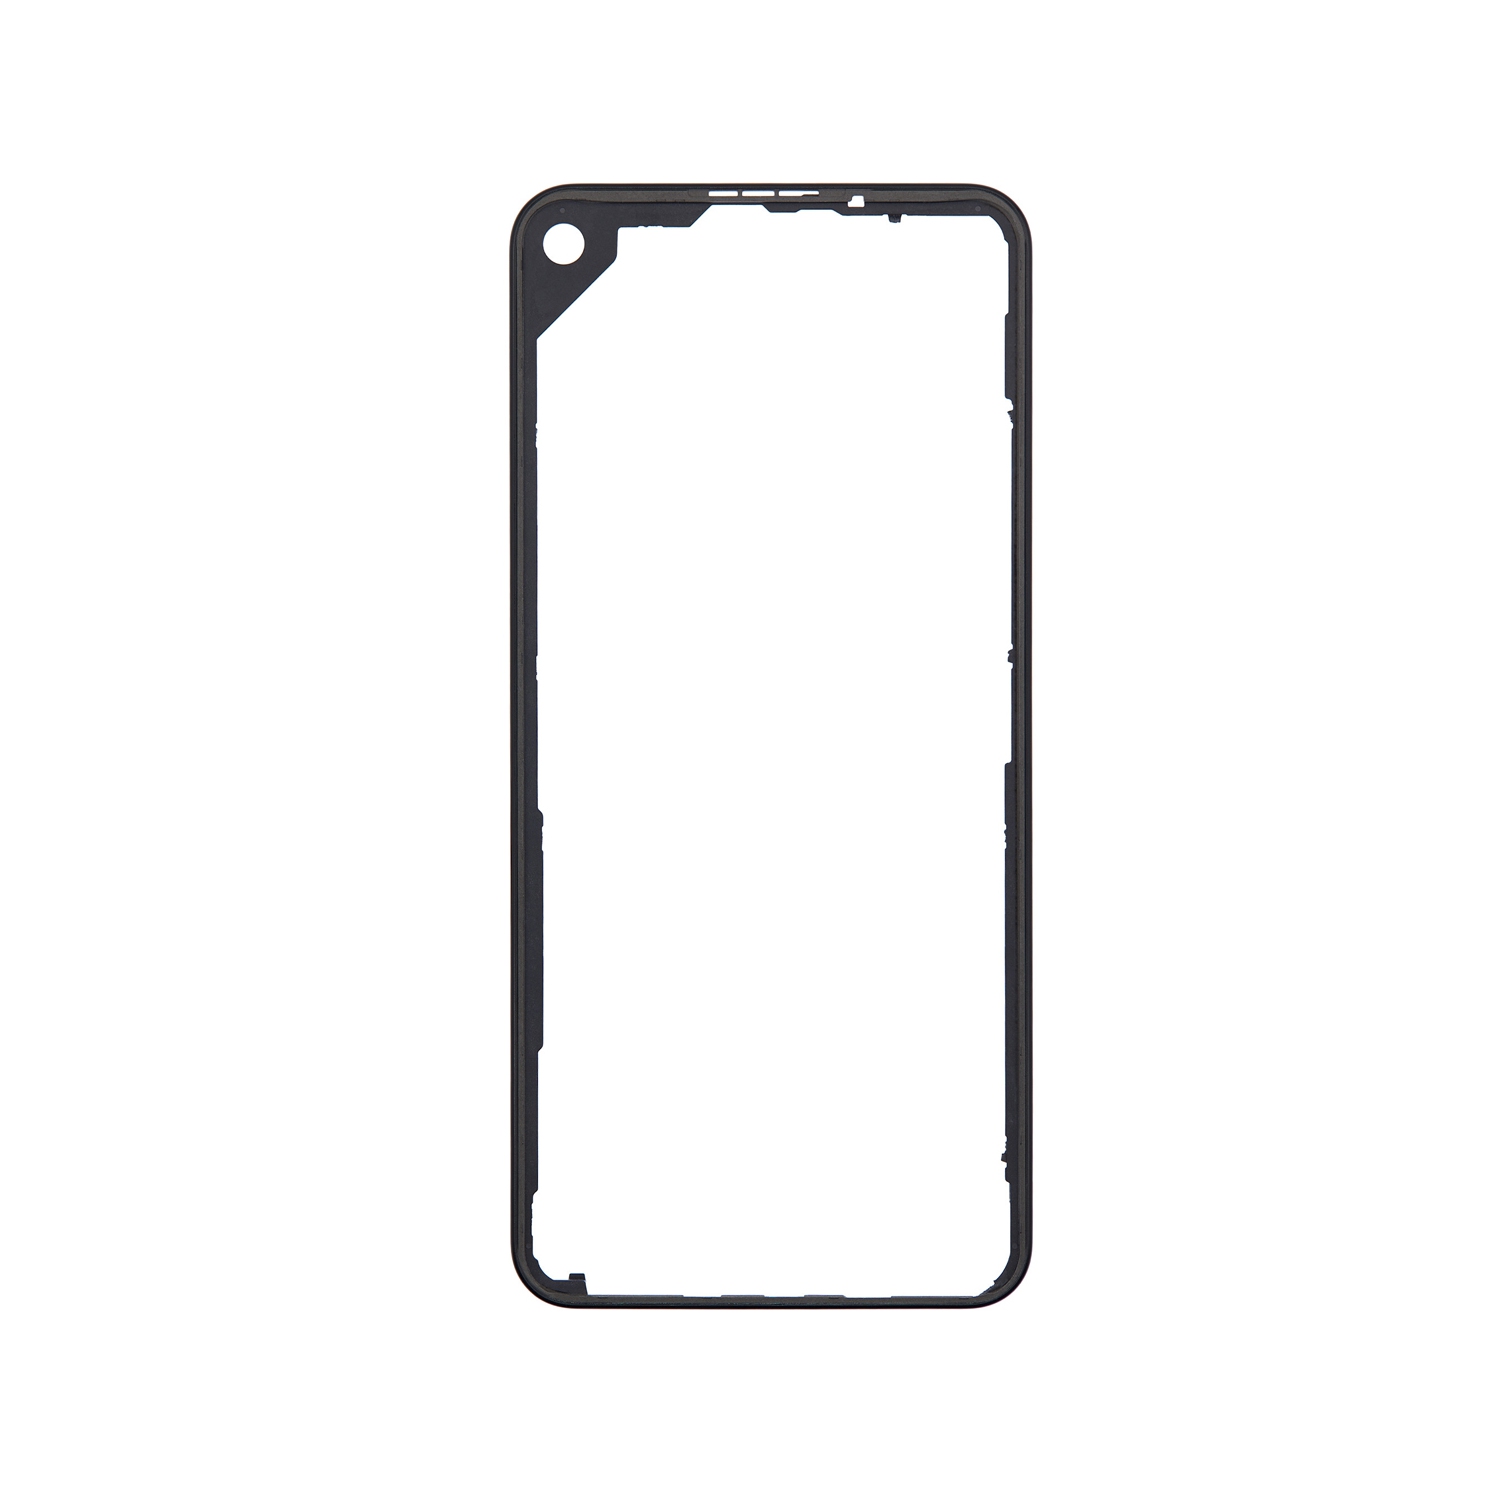 Replacement LCD Frame Bezel Plate For Google Pixel 5a 5G - Mostly Black